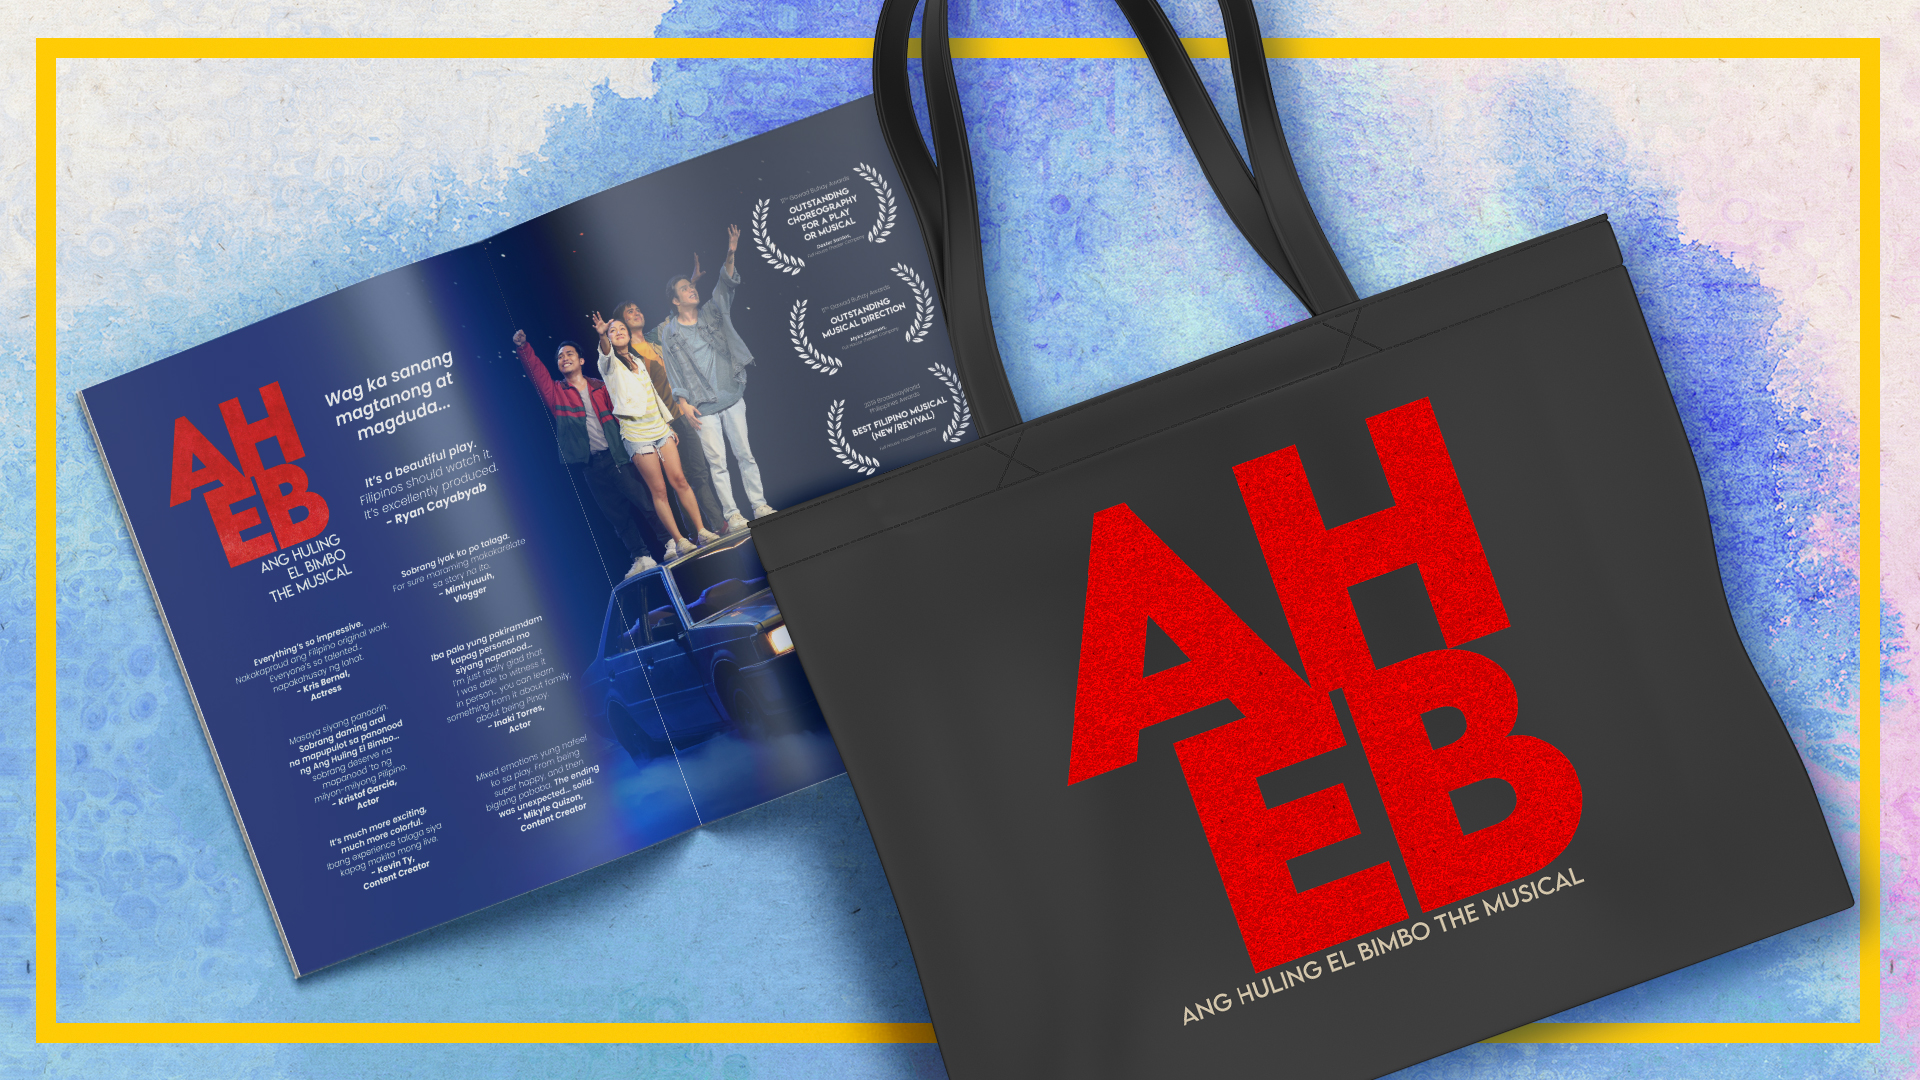 Limited Edition AHEB Merch - Sustainable Tote Bag + Signed Playbill